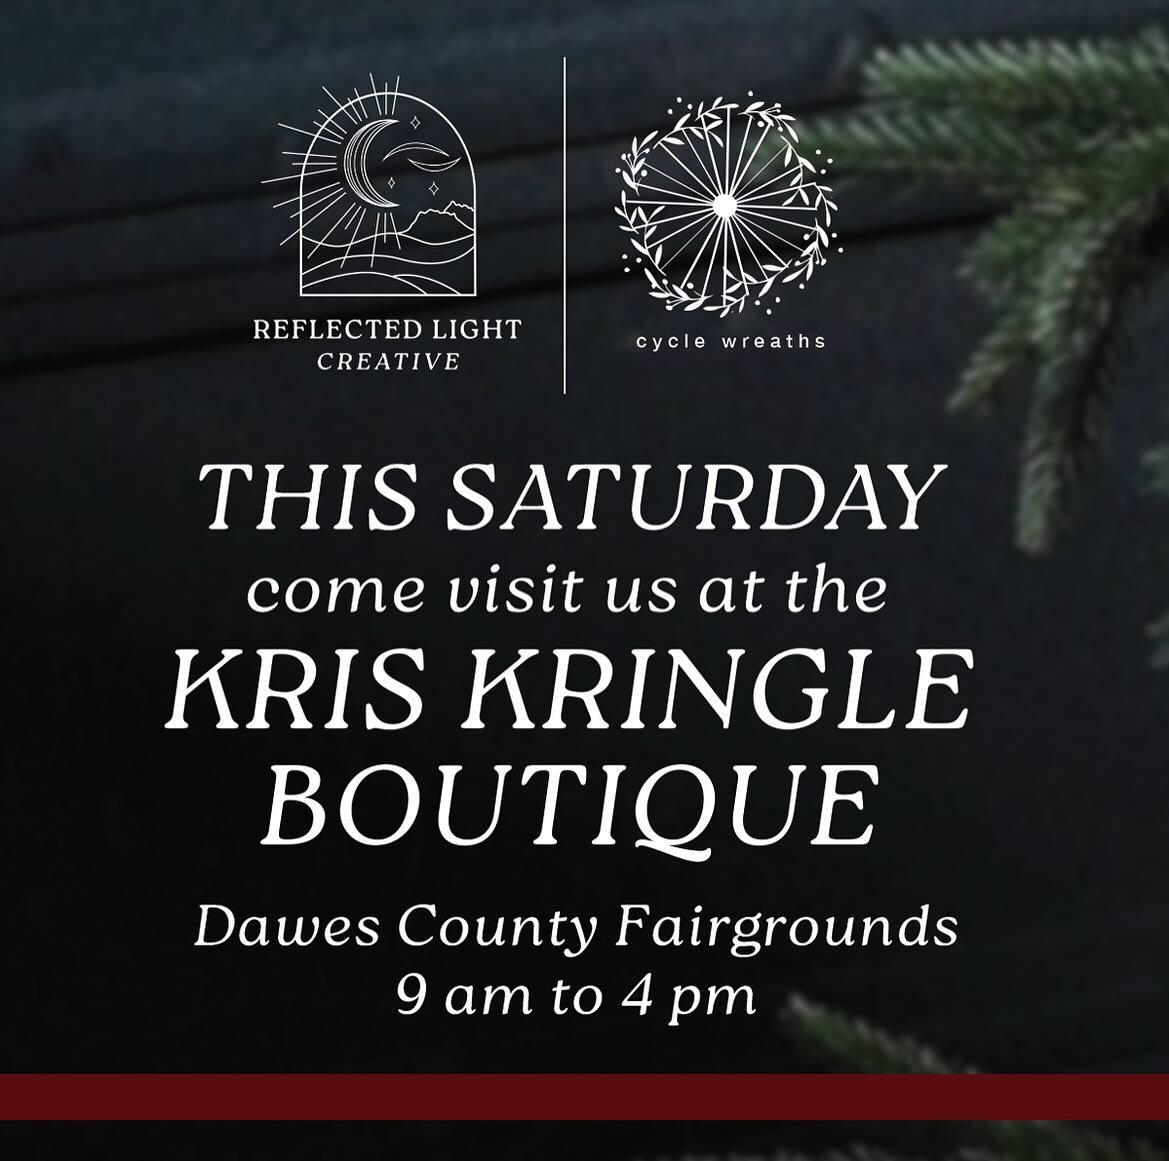 This Saturday, Dec. 5th we will be having a booth at the Kris Kringle Boutique. The event is at the Dawes County Fairgrounds from 9am - 4pm. Stop by to check out our new 2023 up-cycled bike wheel wreaths. We will also have some 3D printed Christmas o